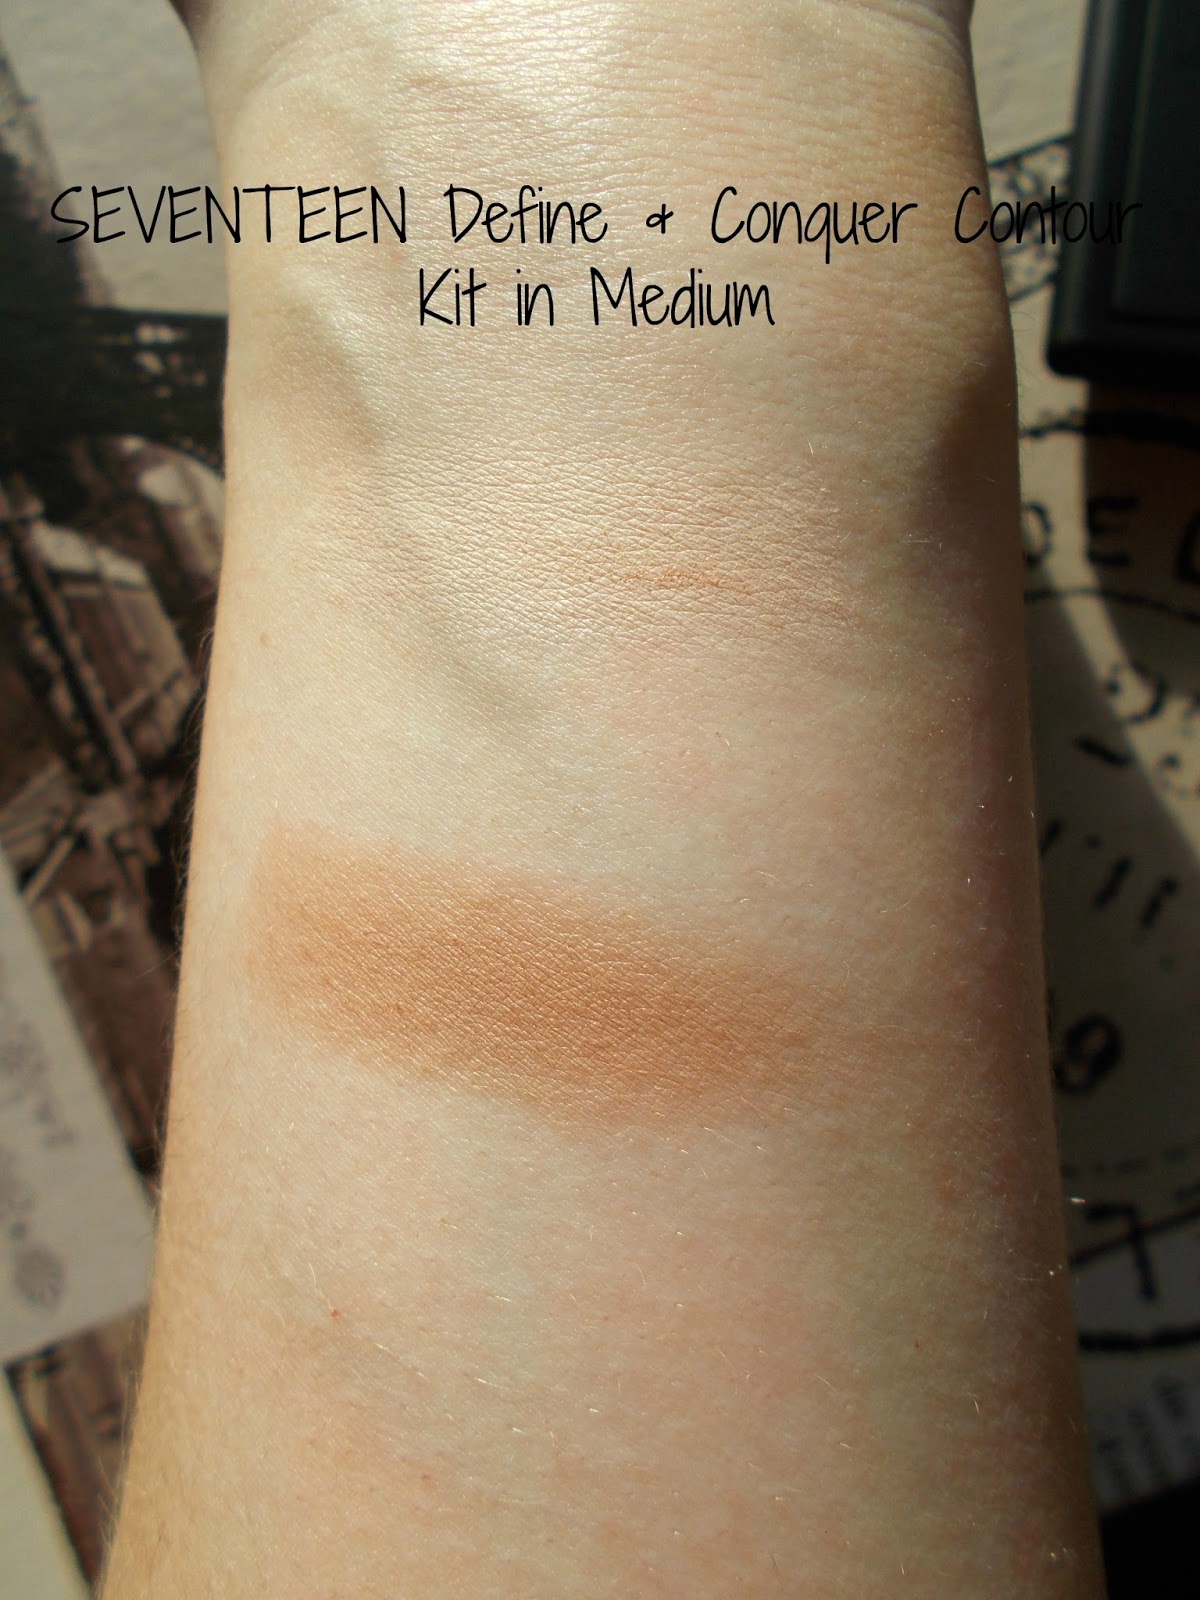 SEVENTEEN define and conquer contour kit in medium swatches